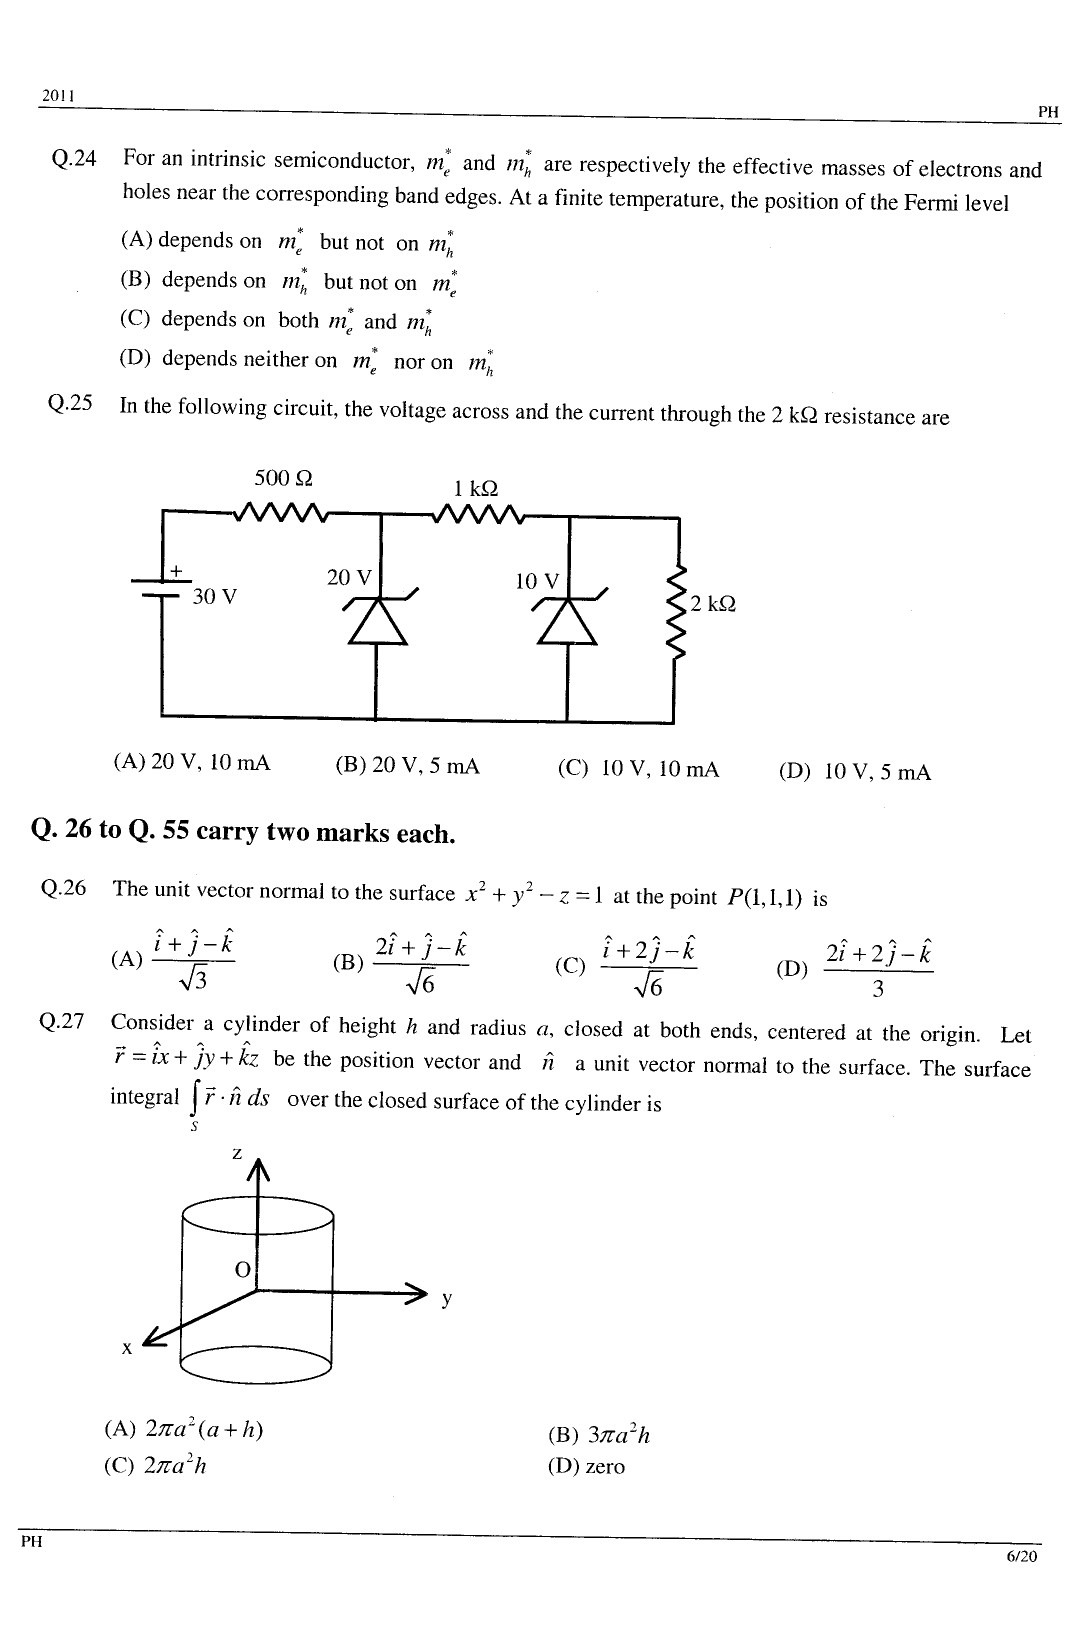 GATE Exam Question Paper 2011 Physics 6